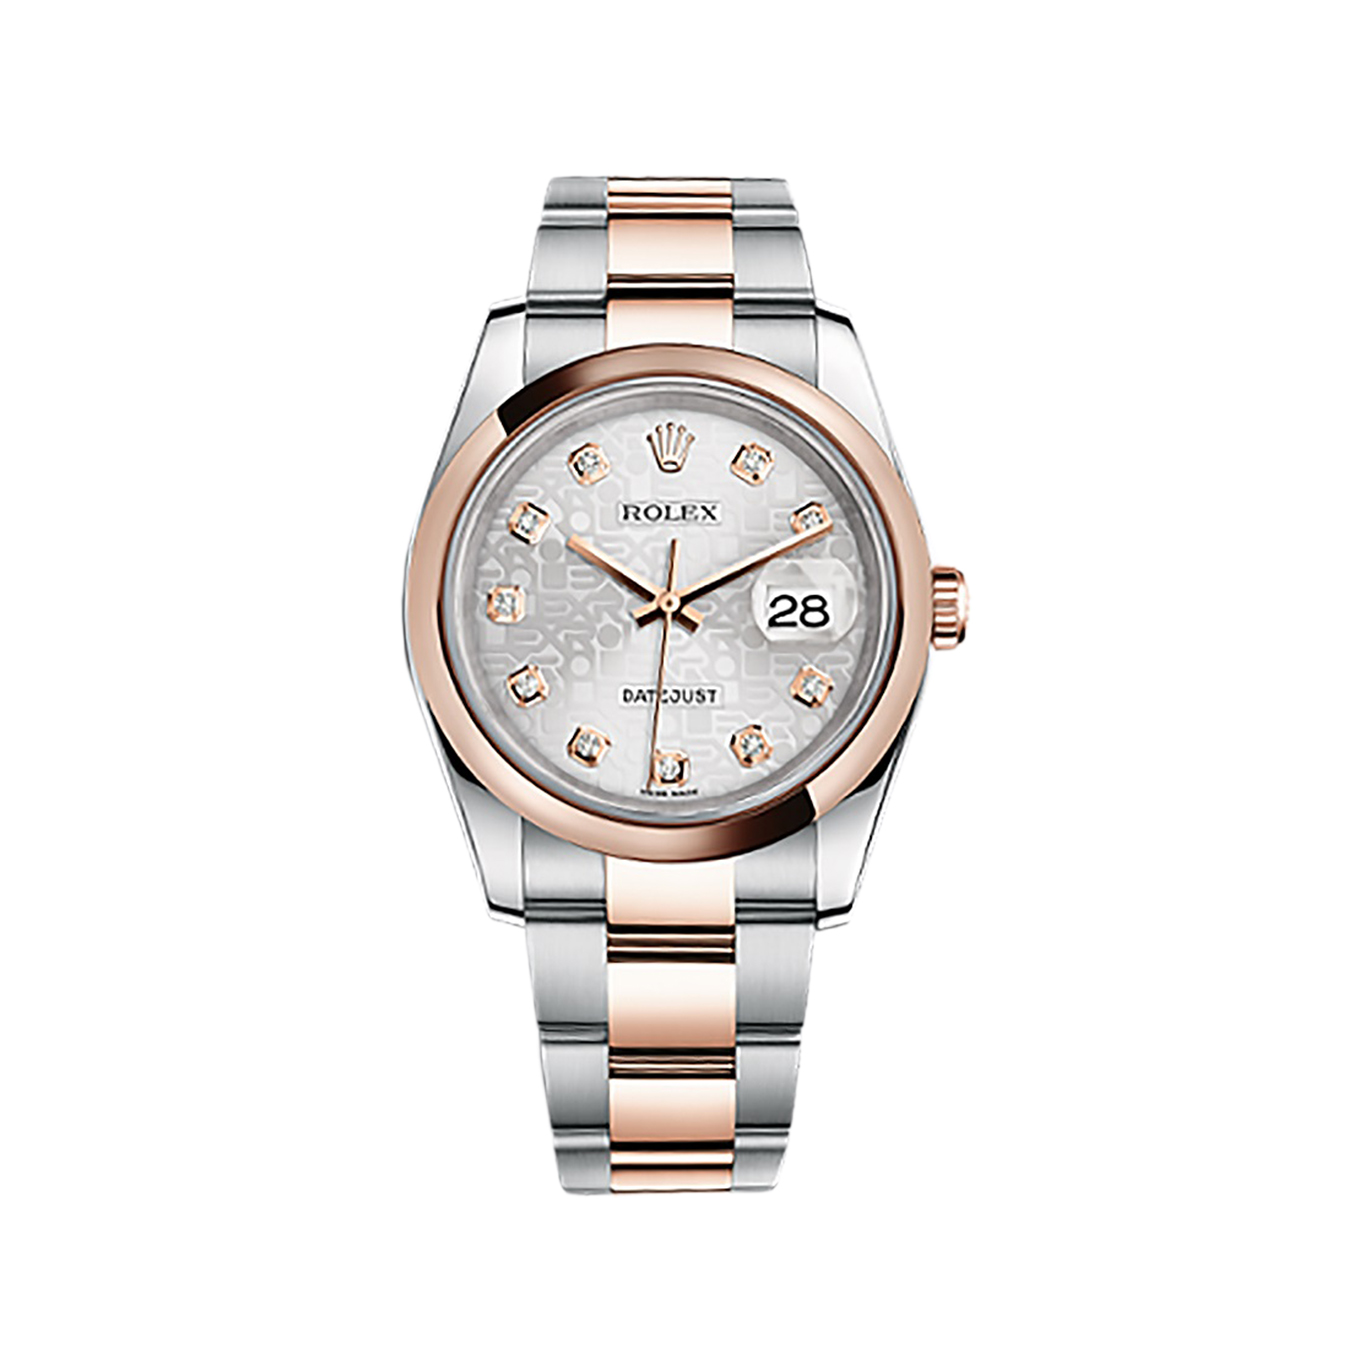 Datejust 36 116201 Rose Gold & Stainless Steel Watch (Silver Jubilee Design Set with Diamonds)